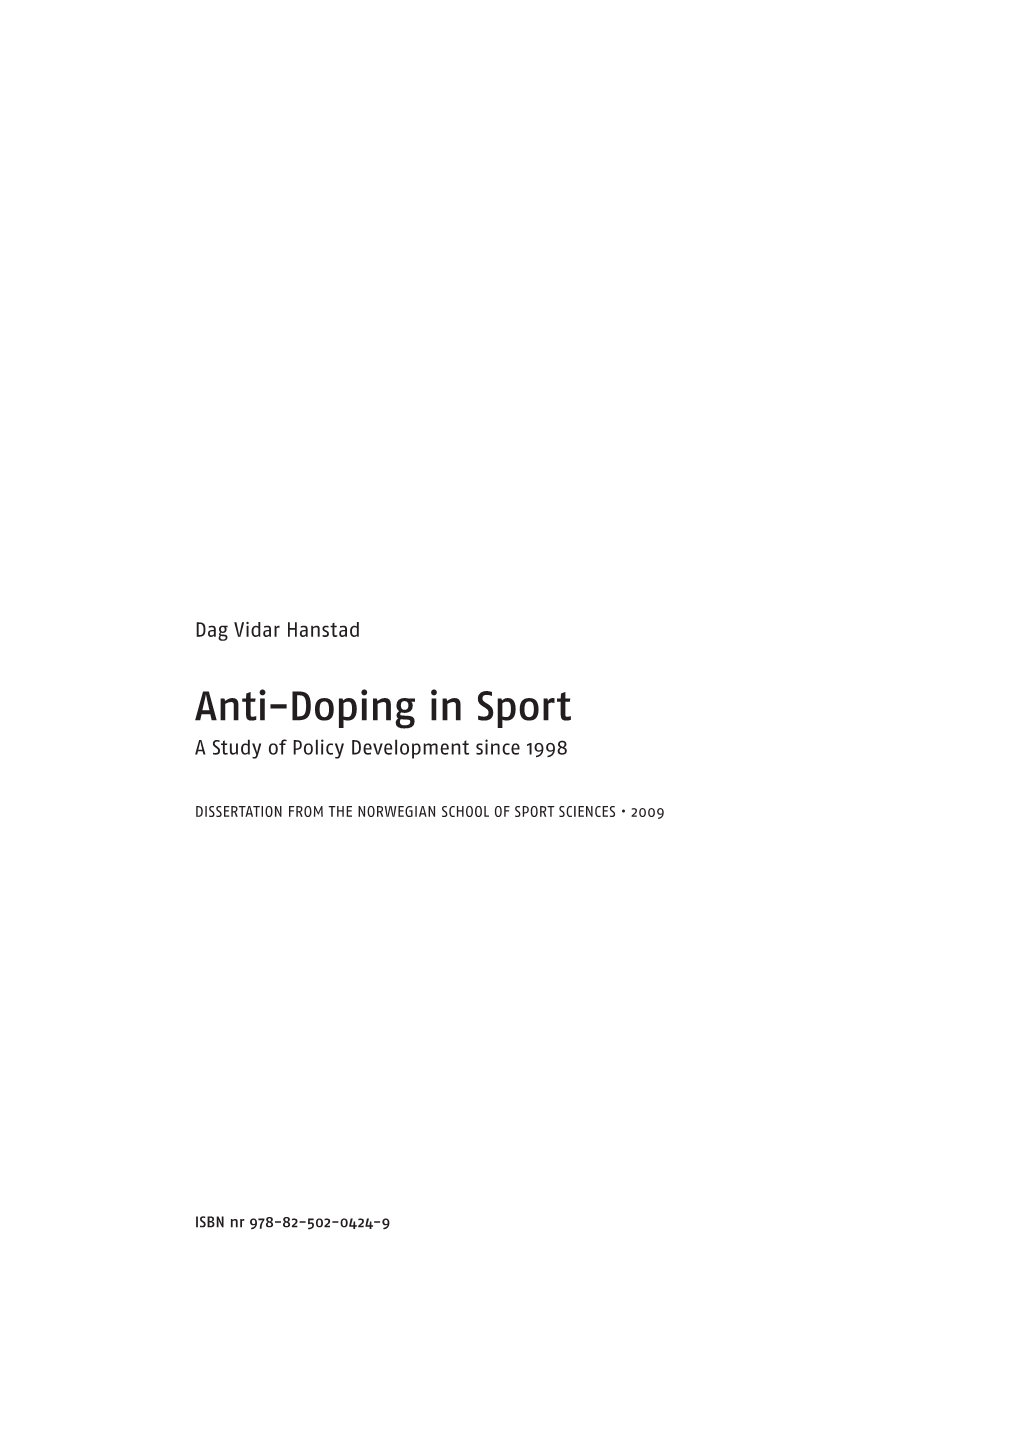 Anti-Doping in Sport a Study of Policy Development Since 1998